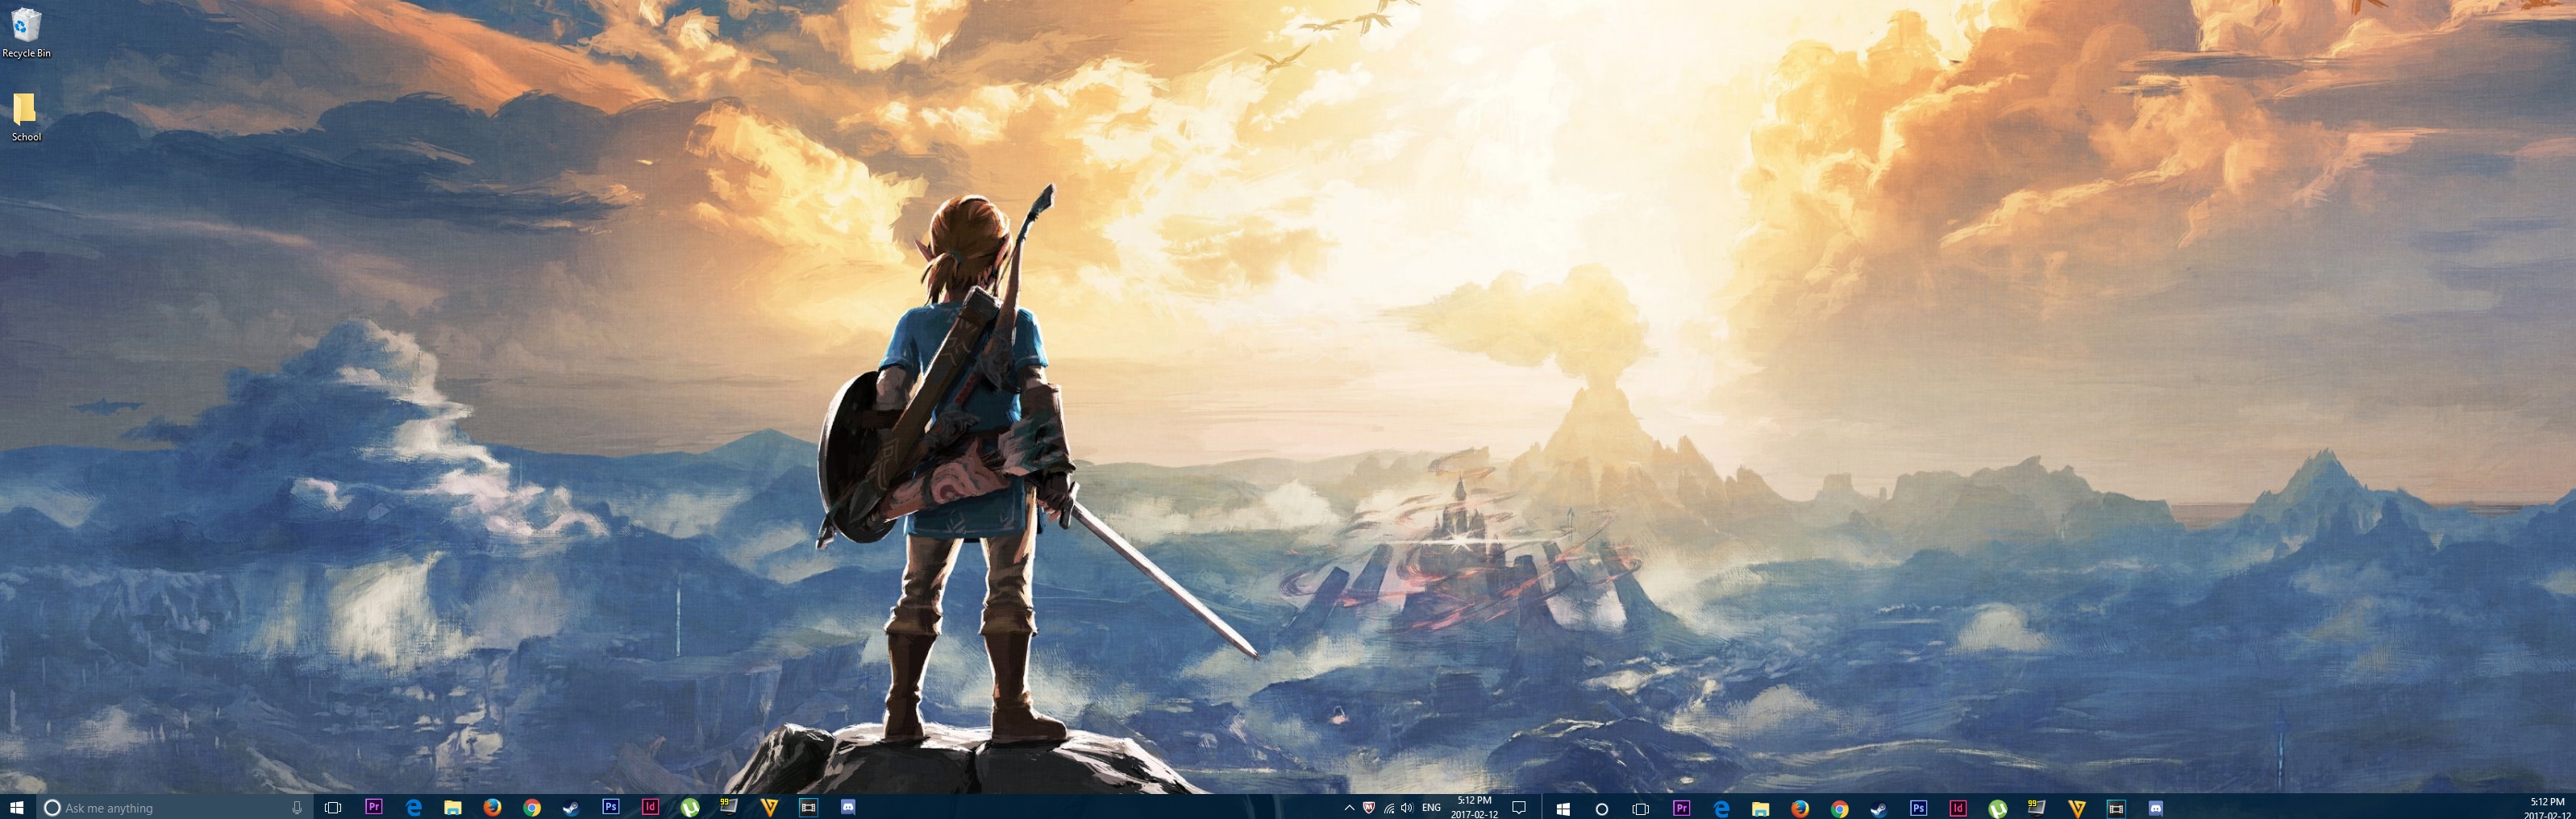 10 New Breath Of The Wild Dual Monitor Wallpaper FULL HD 1080p For PC Background